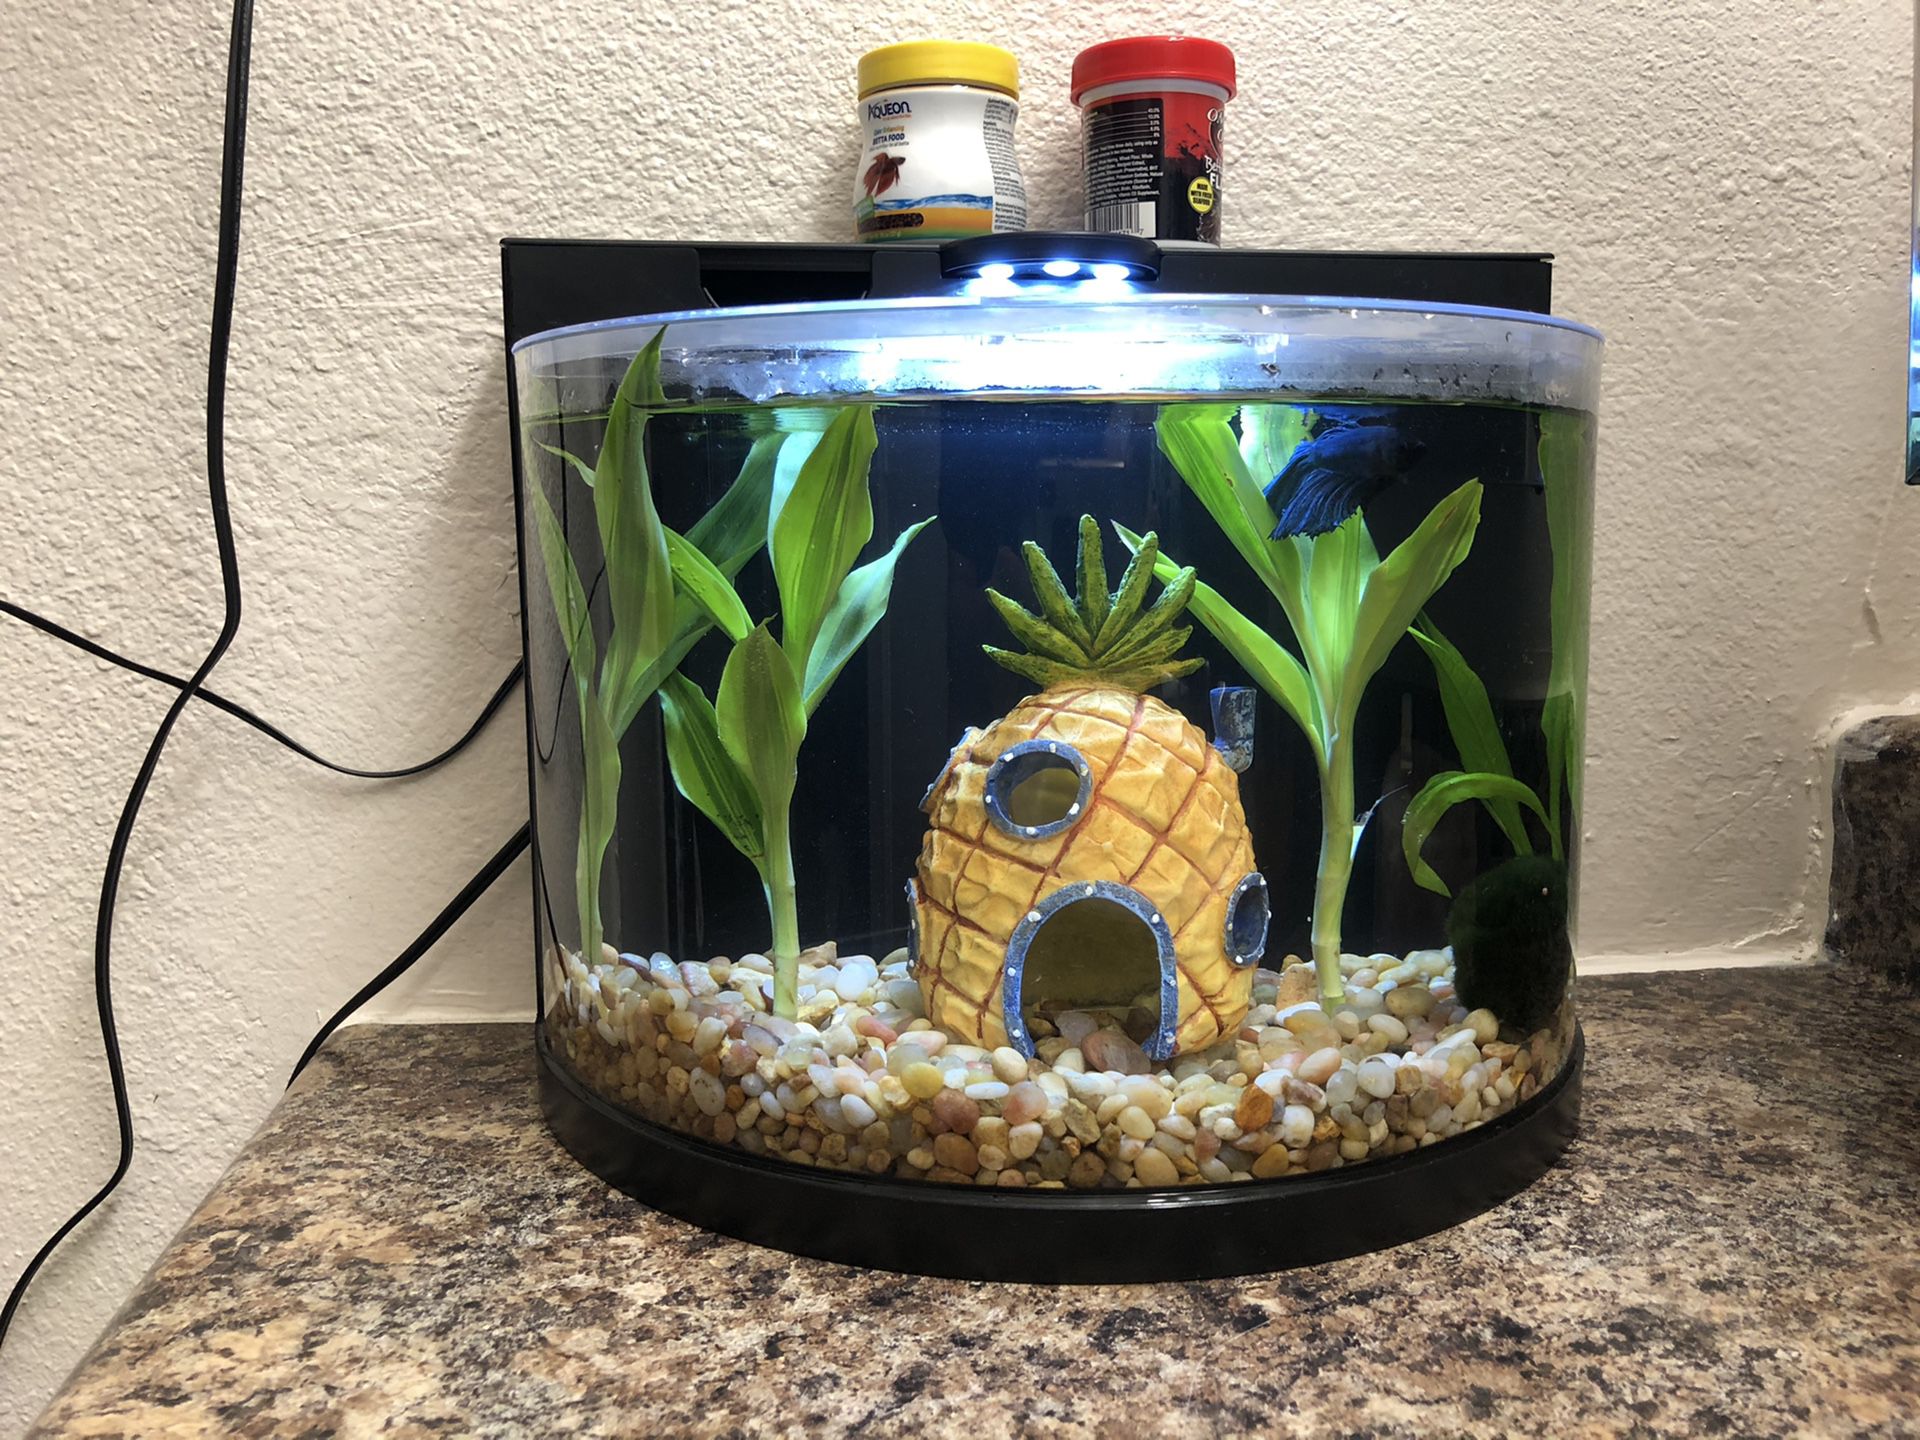 Brand new Betta fish tank w/ everything included